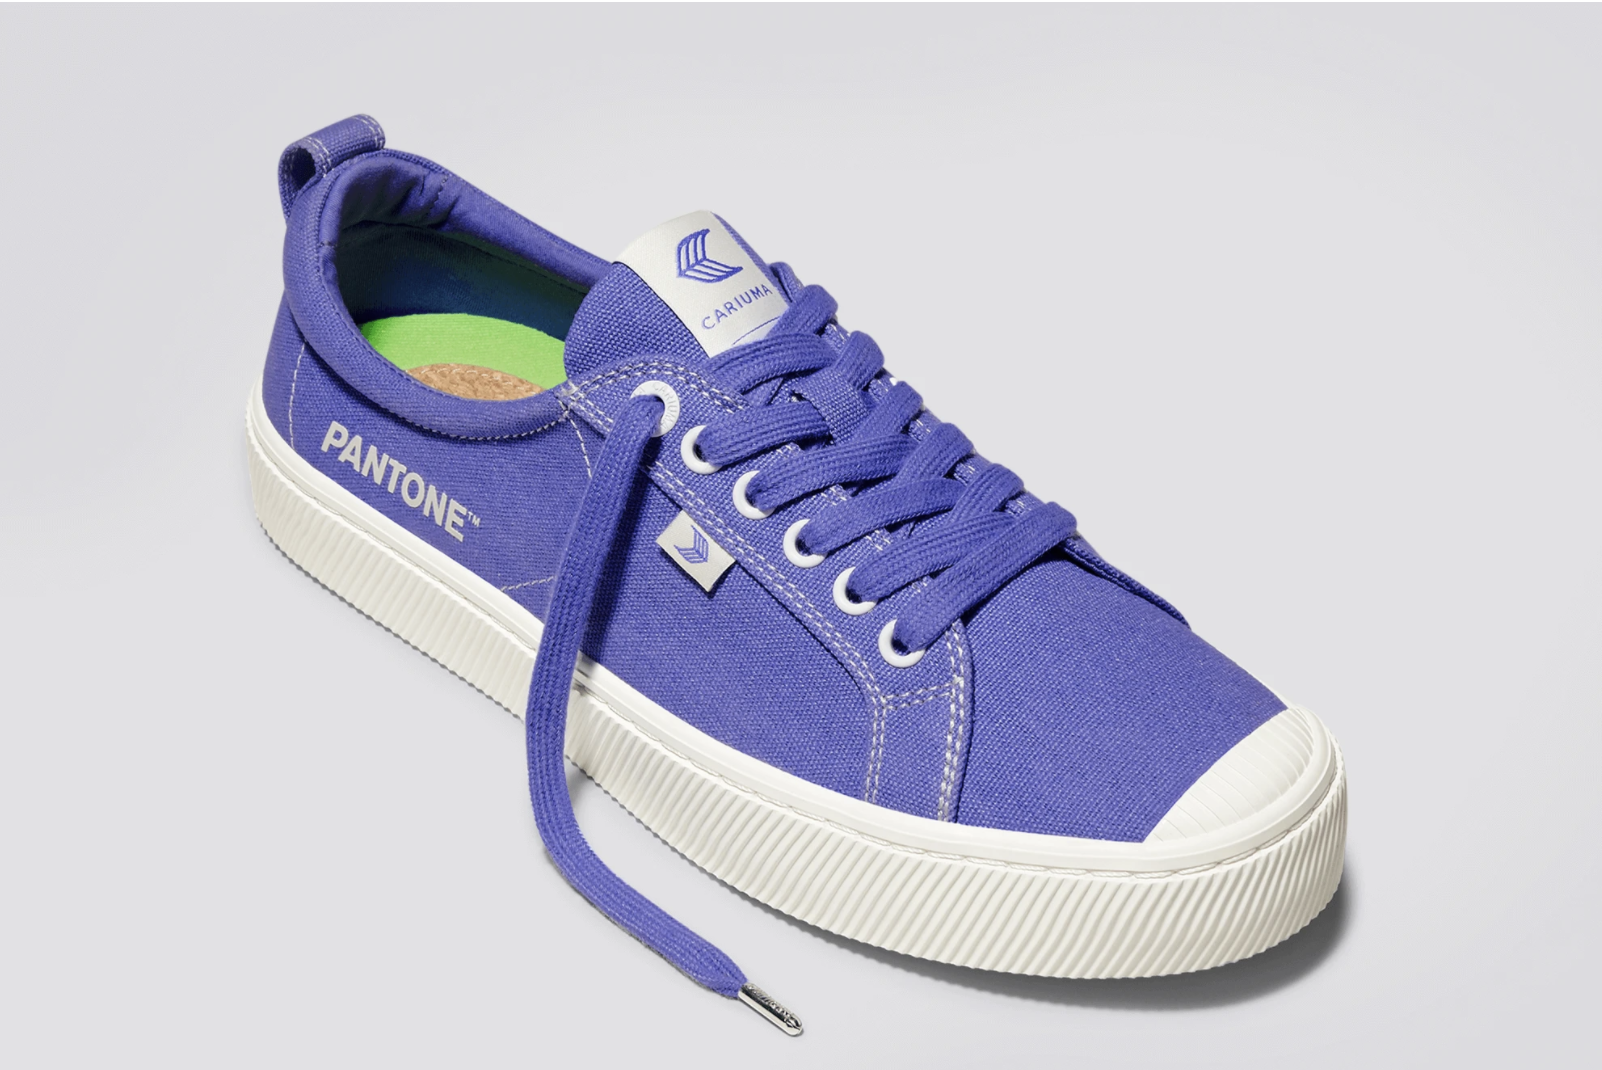 Cariuma Just Released Their Bestselling Sneakers in Pantone’s Color of the Year